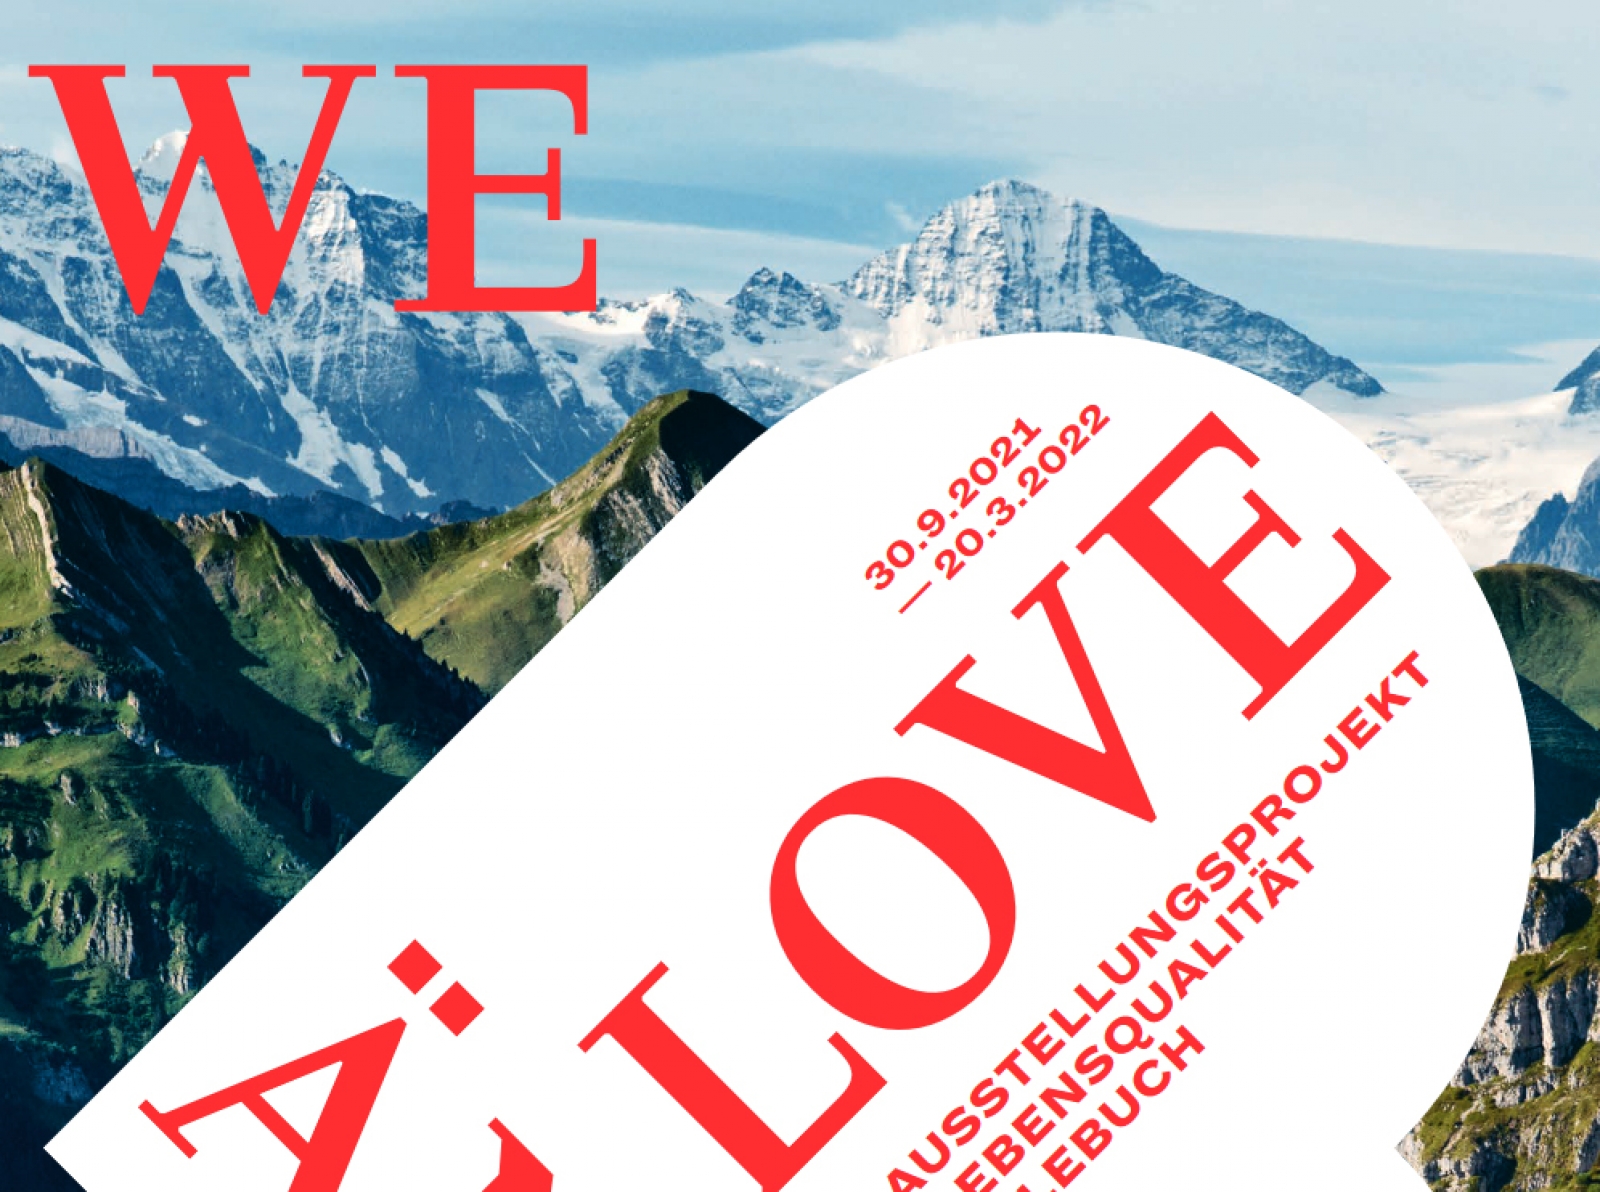 New exhibition on sustainable provision of life quality in the Entlebuch UNESCO Biosphere Reserve